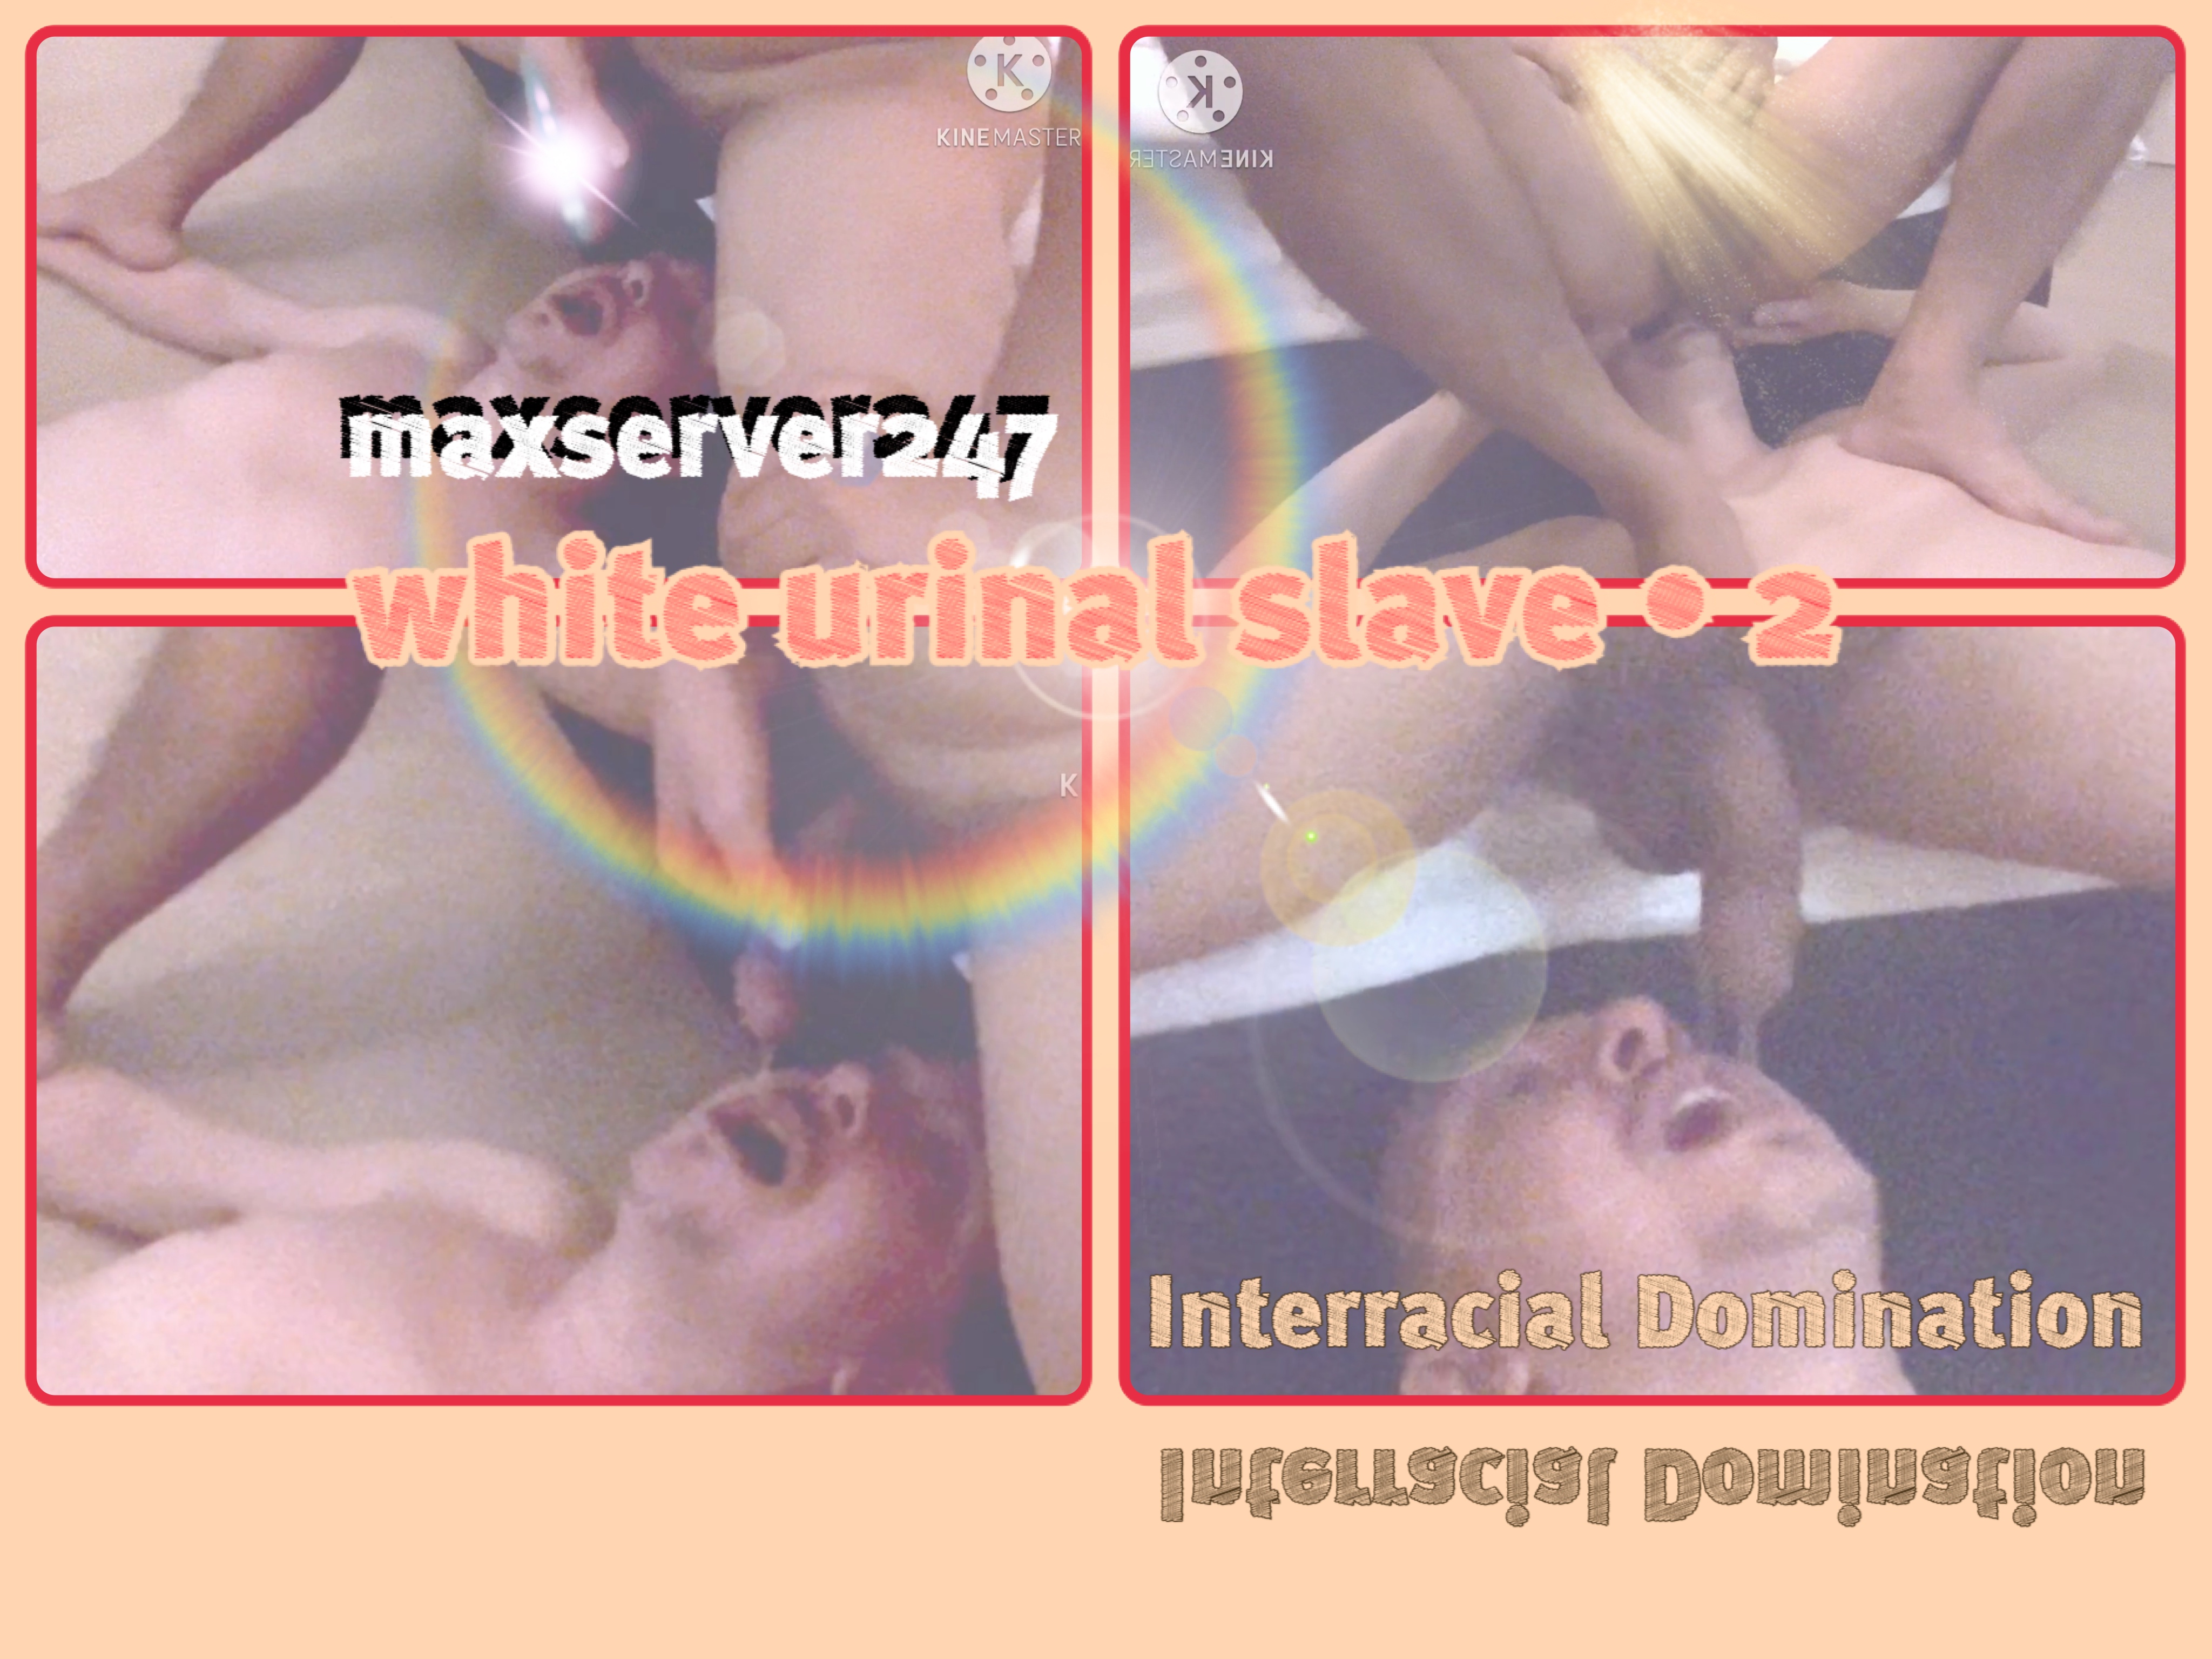 WUS02 white urinal slave for Asian master. 2x Load